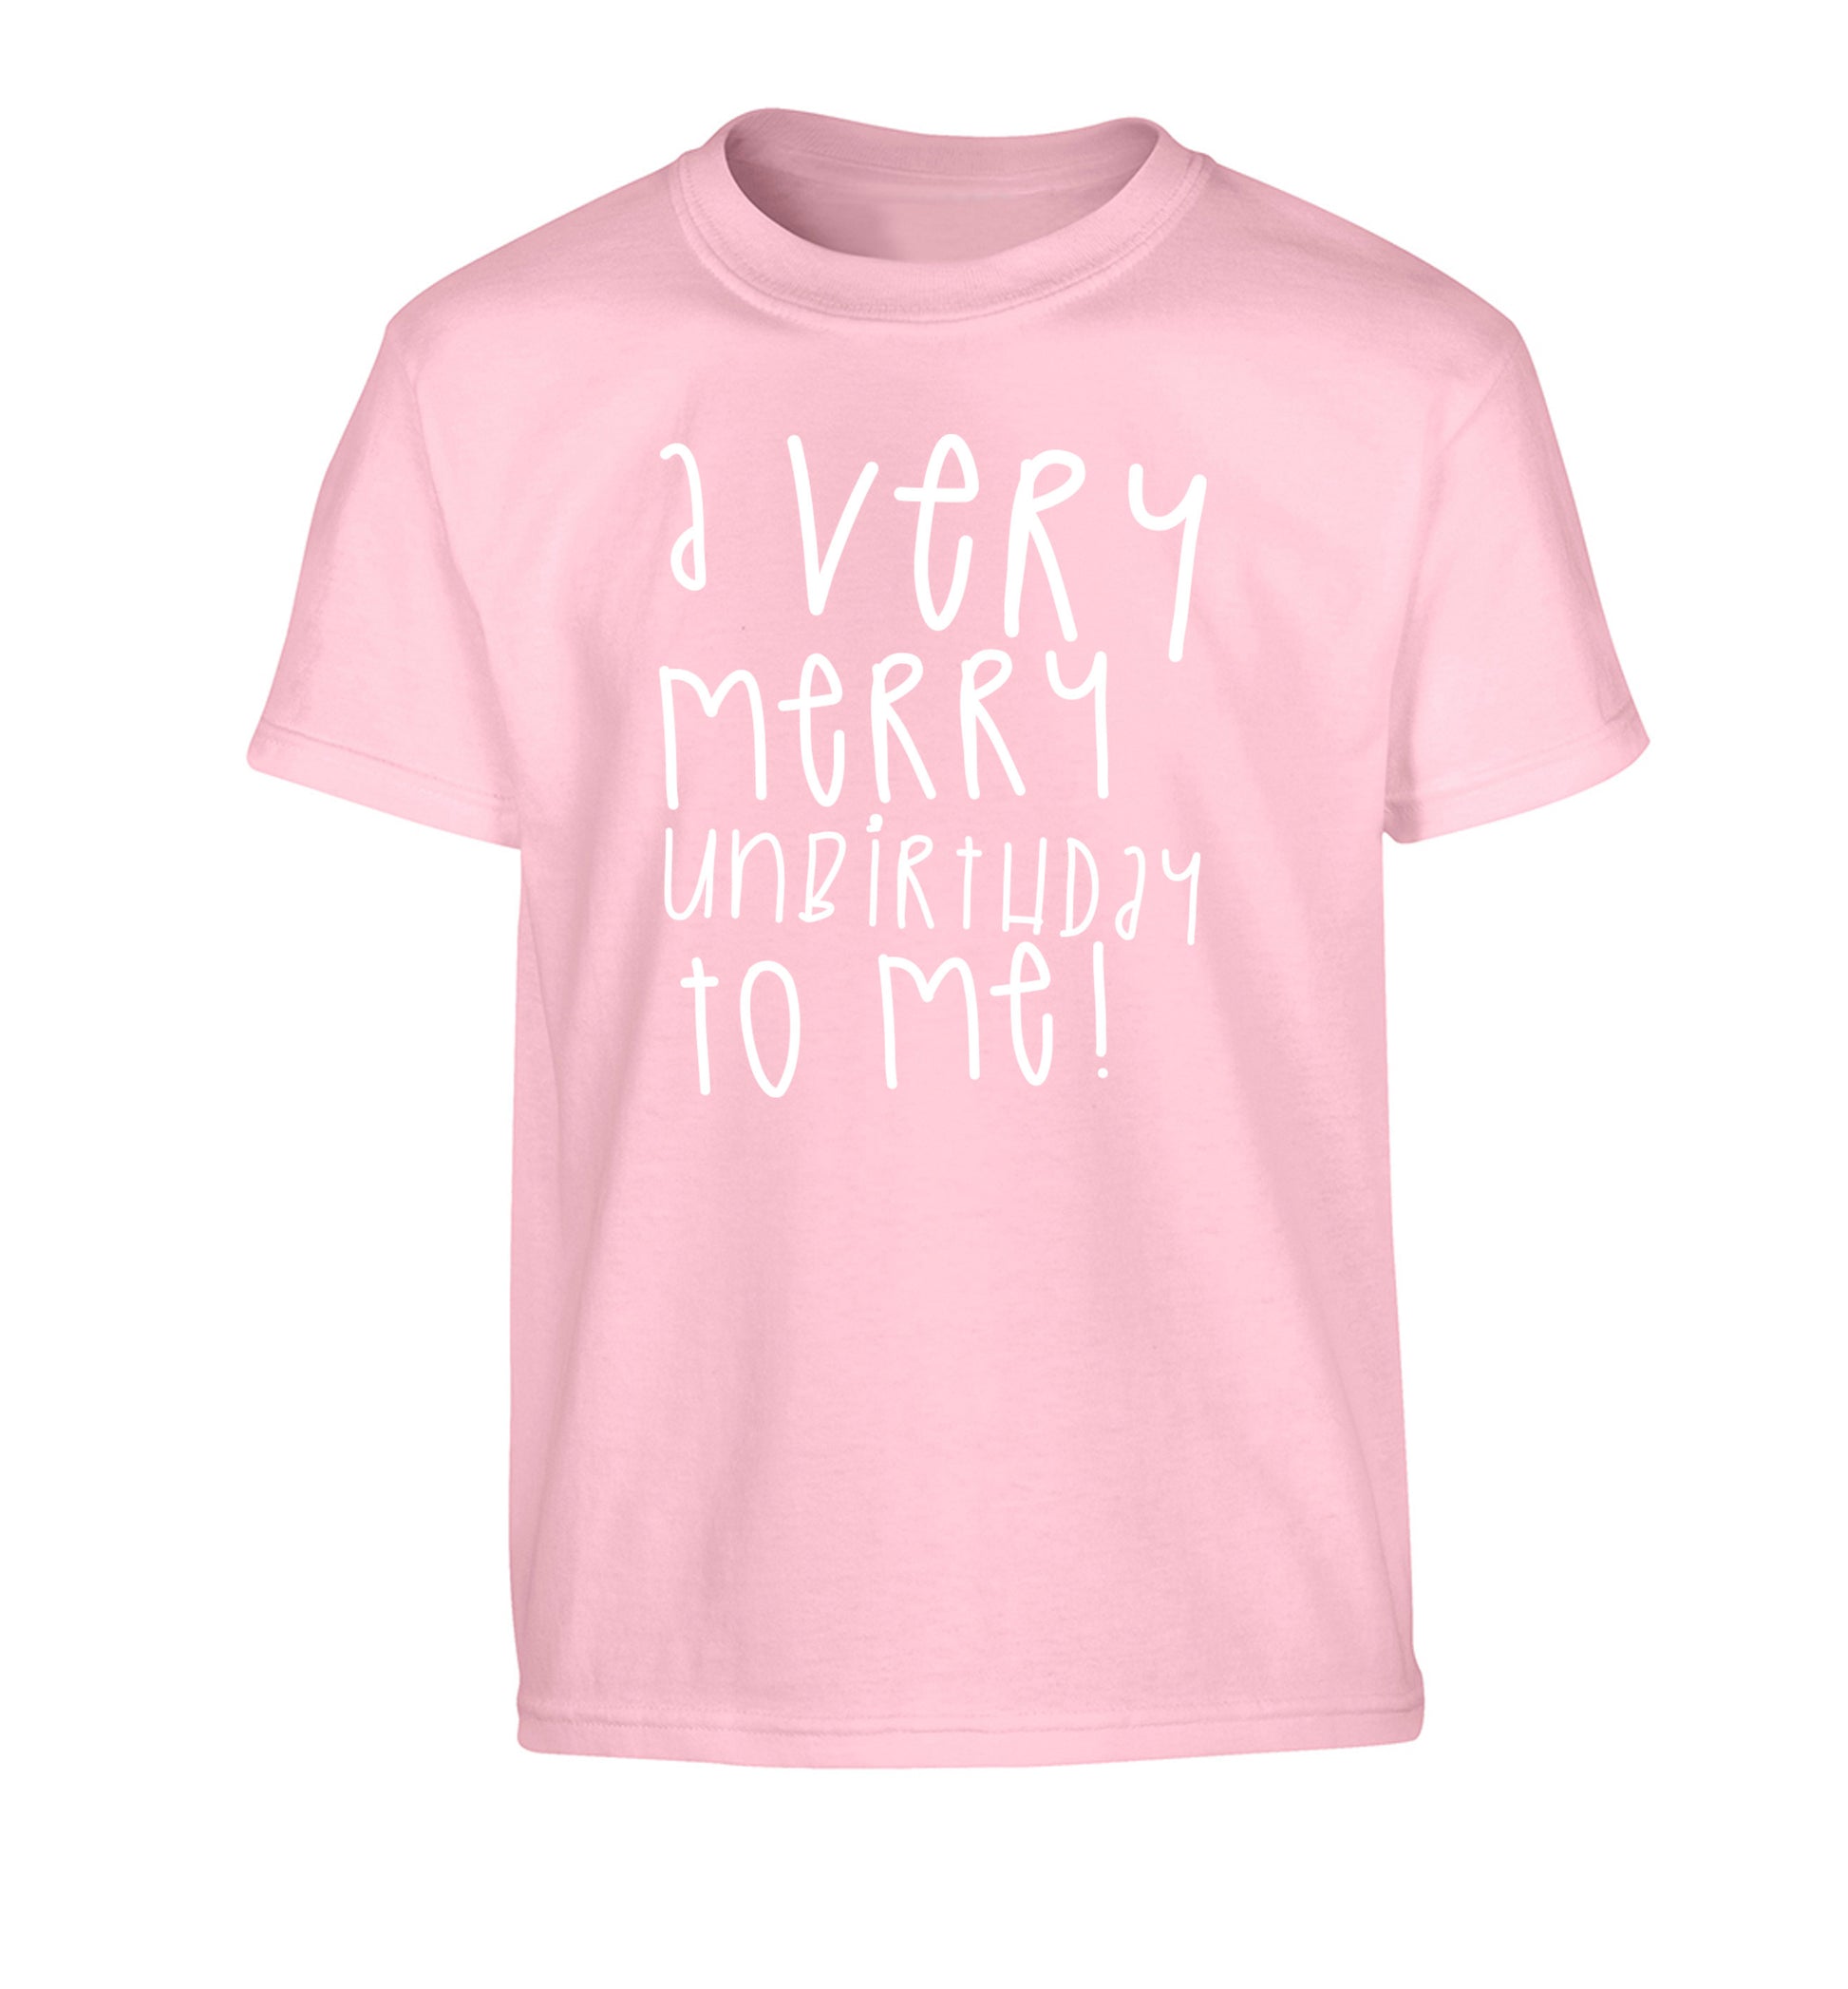 A very merry unbirthday to me! Children's light pink Tshirt 12-14 Years